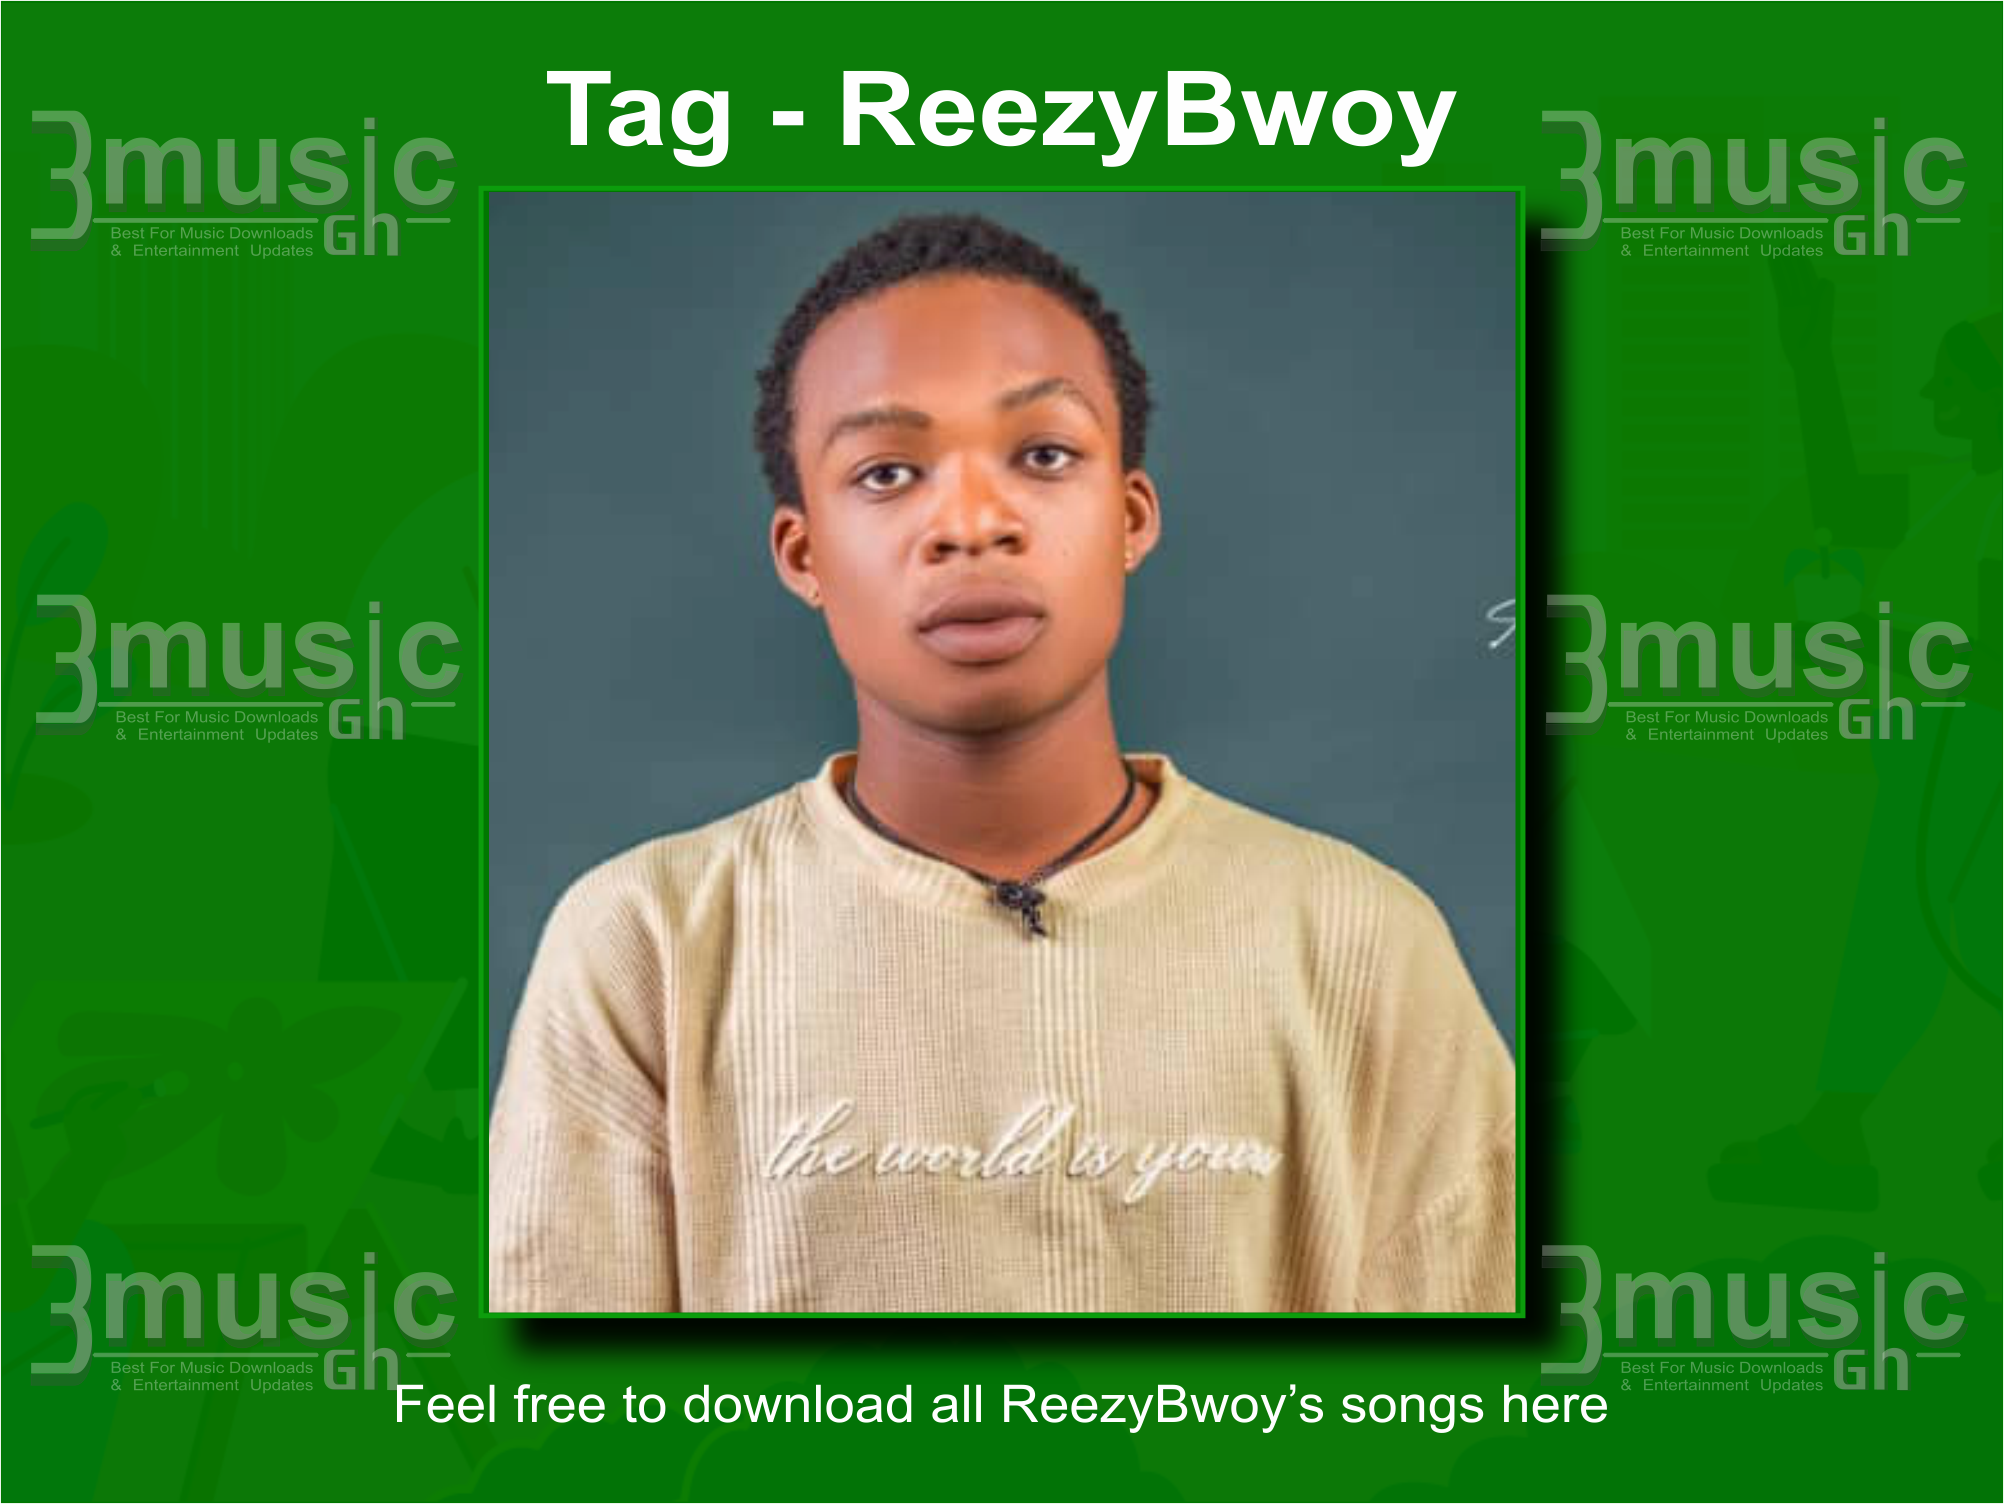 Reezybwoy songs all download_3musicGh.com